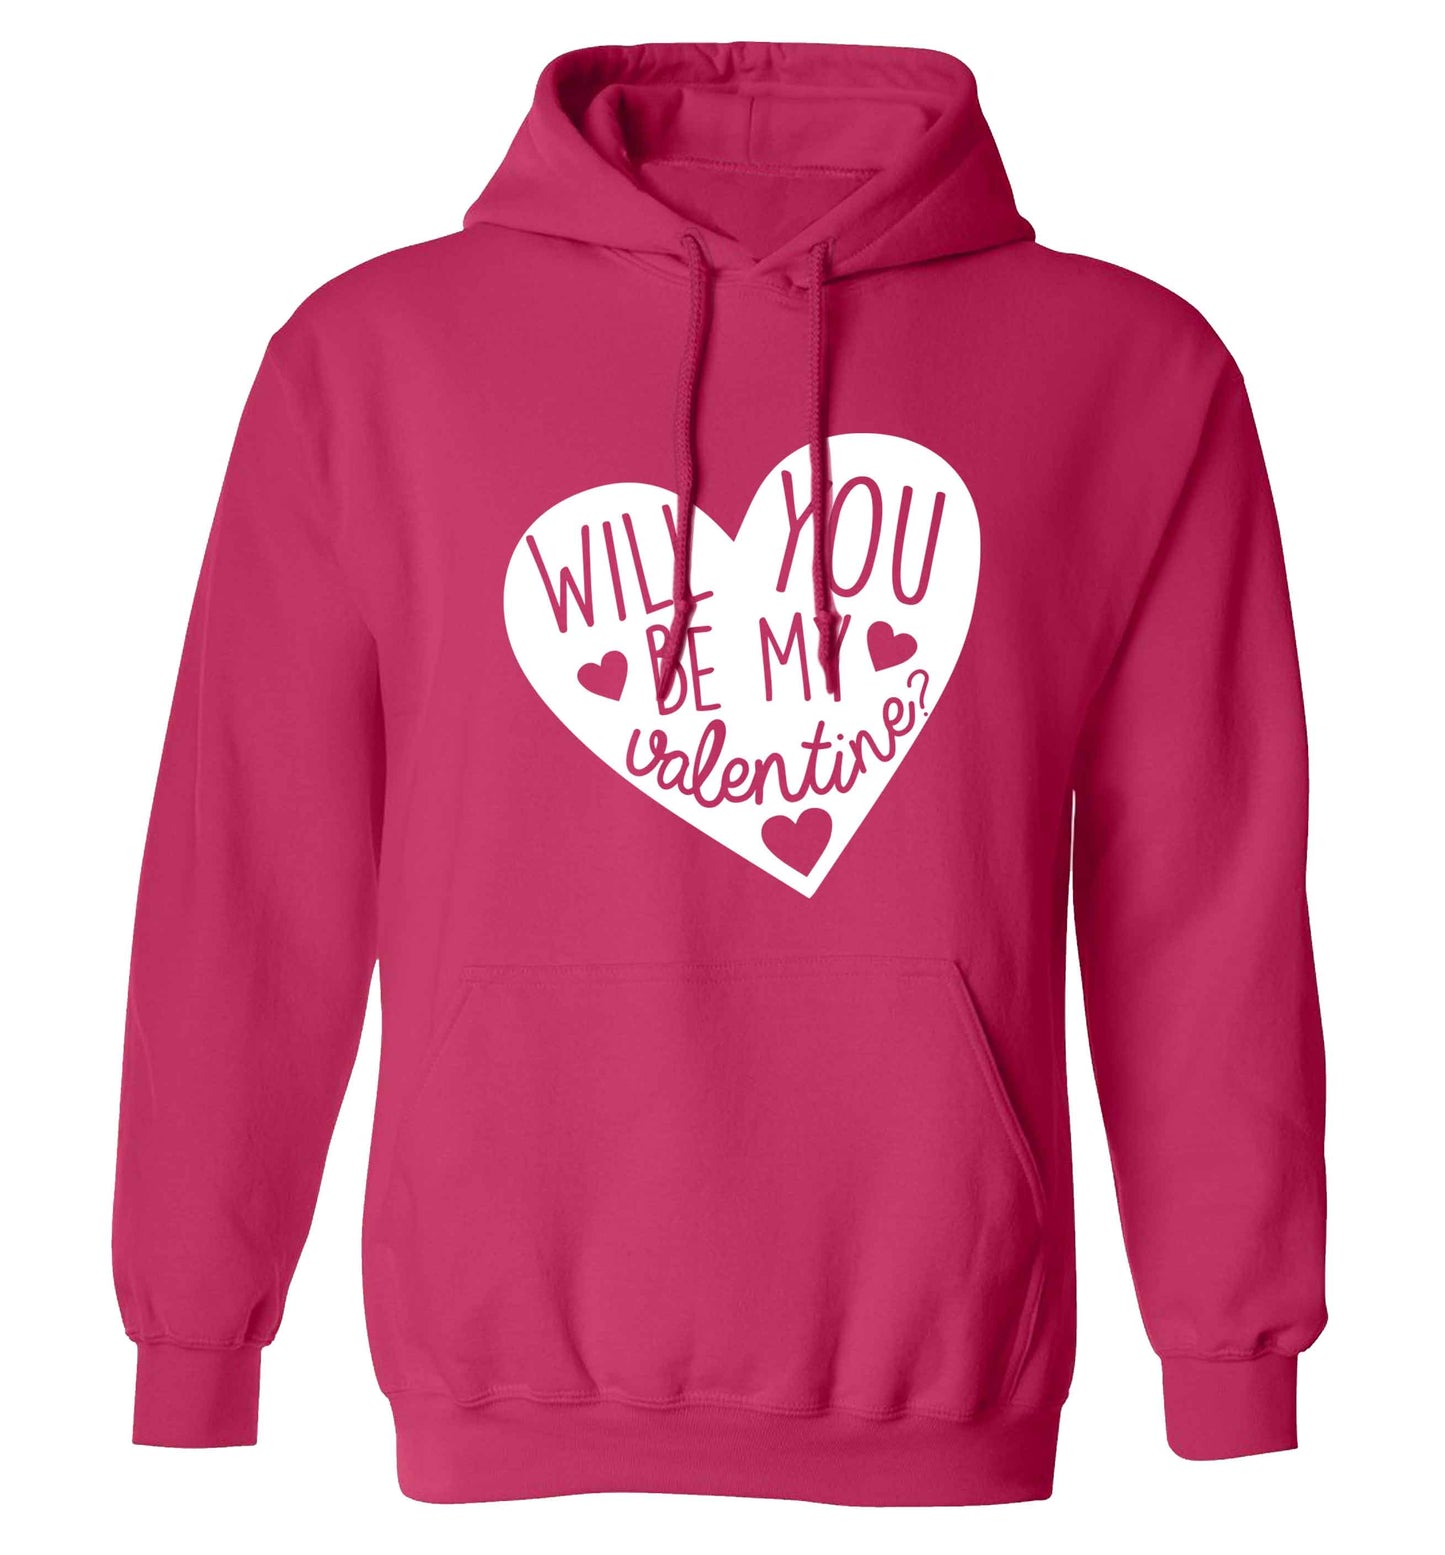 Will you be my valentine? adults unisex pink hoodie 2XL